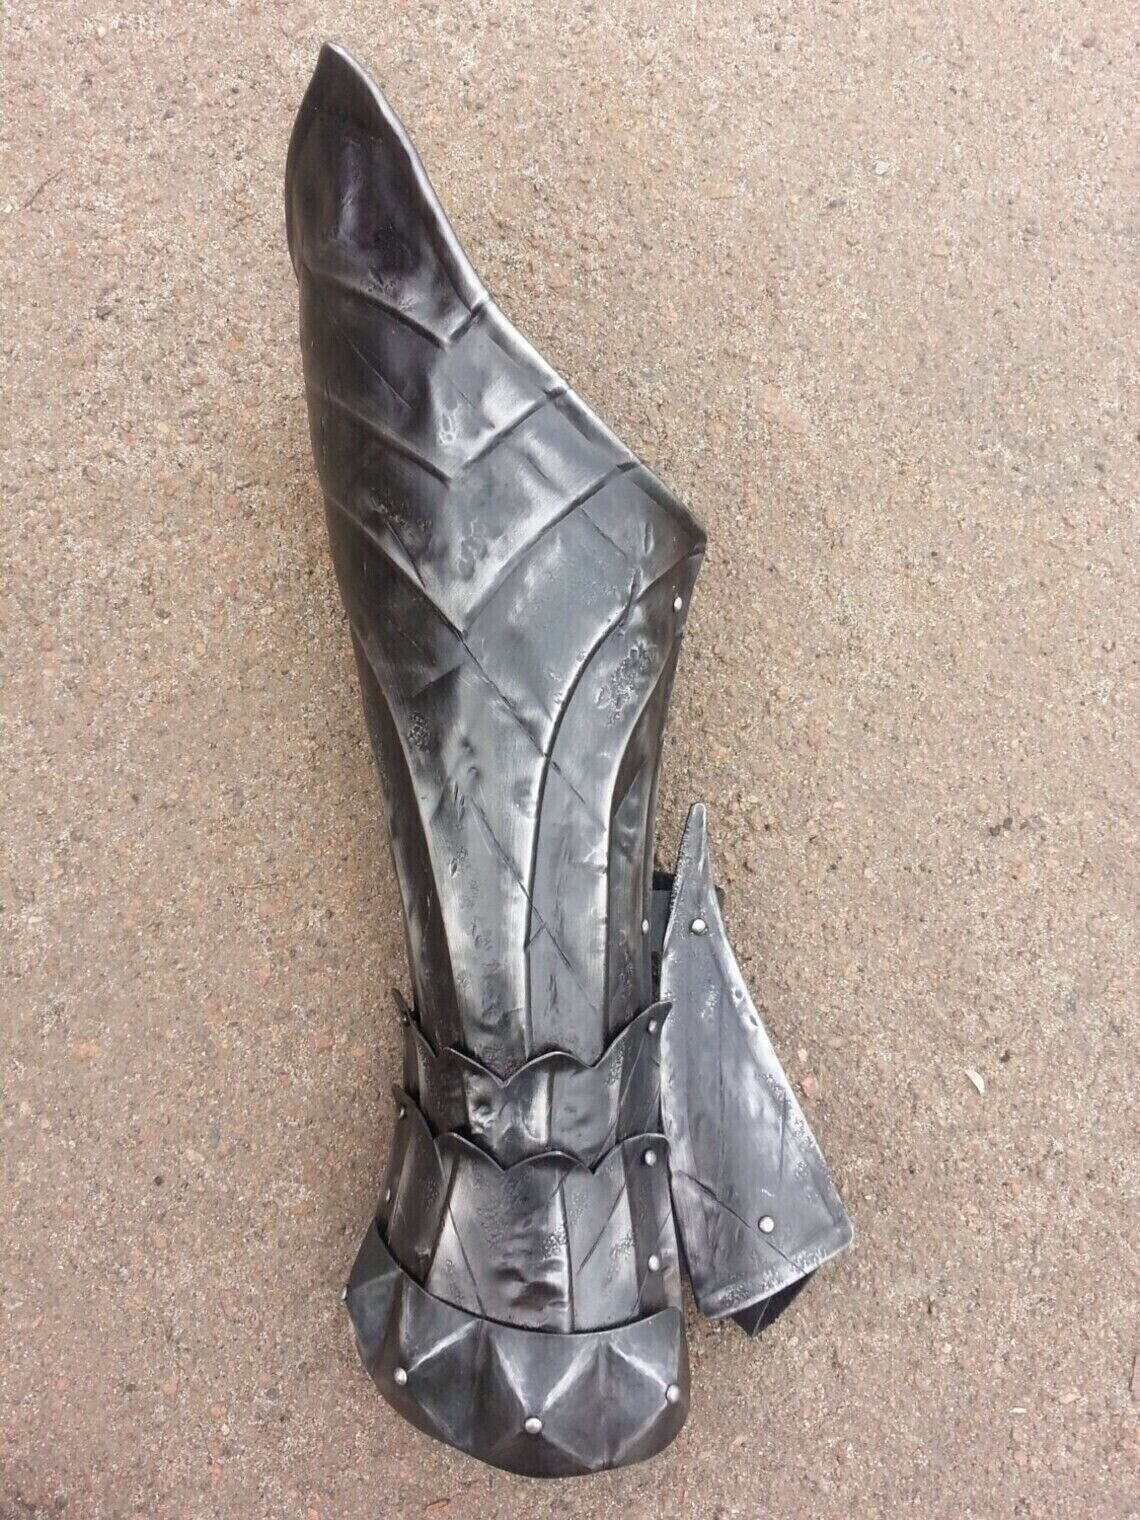 Blackened Pair of bracers with metal gloves, female knight cosplay armor, RT57